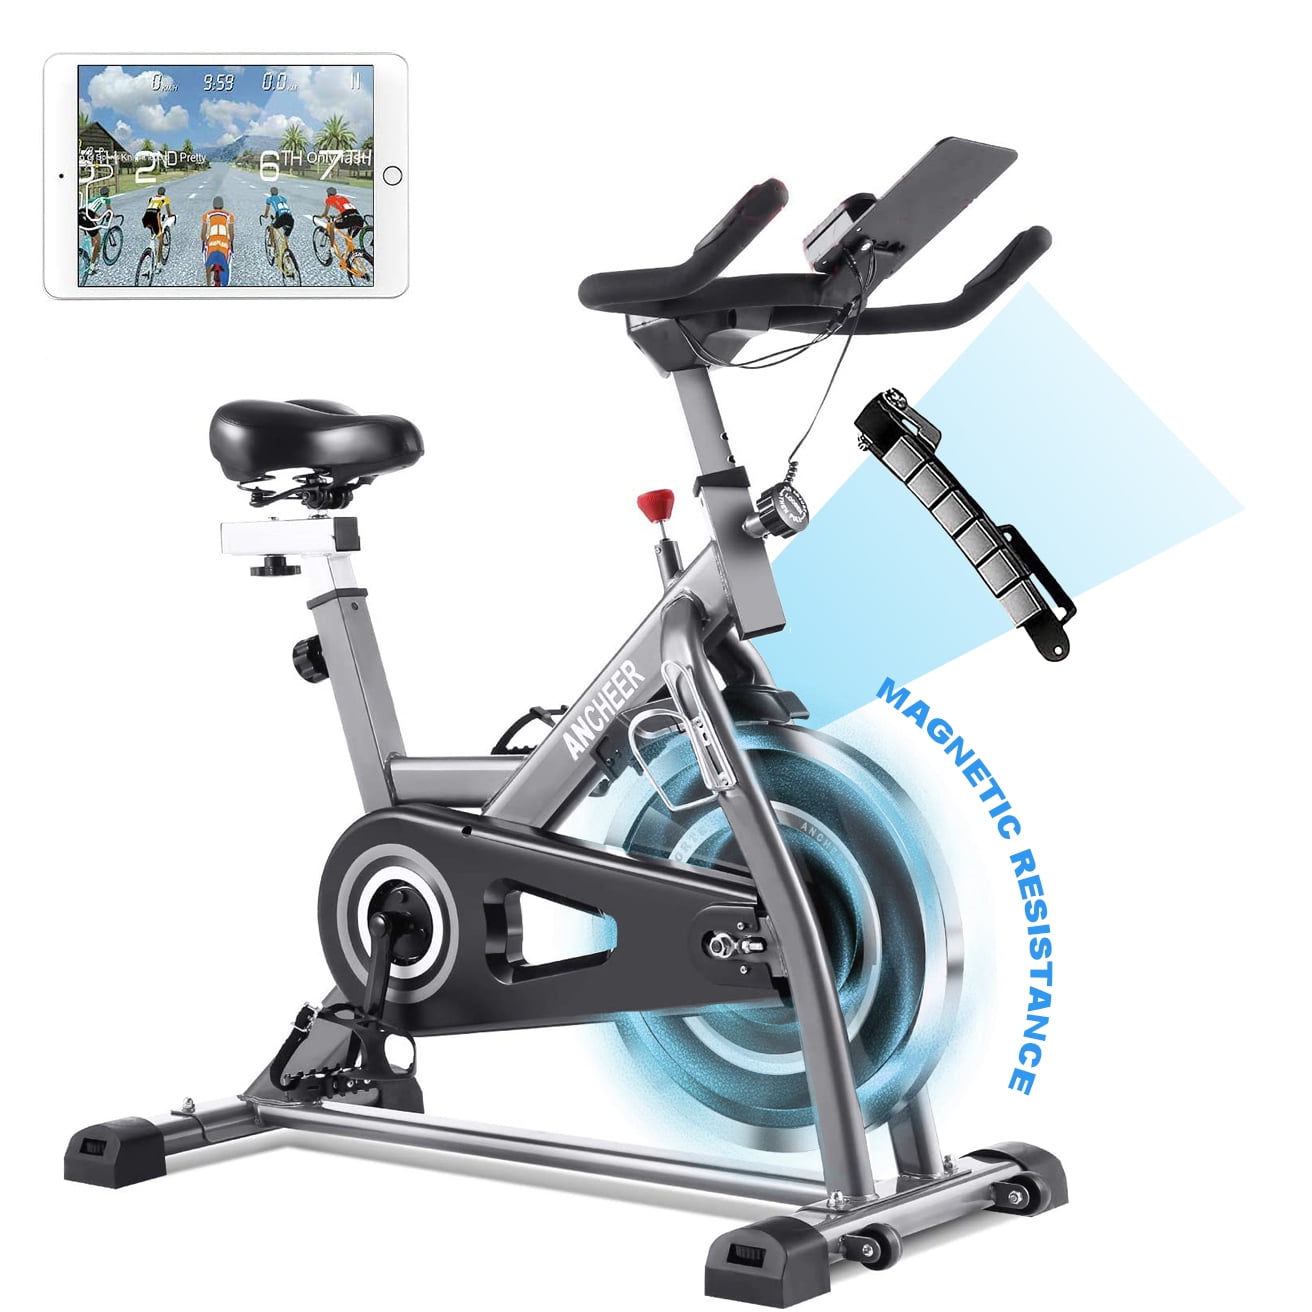 Details about   Stationary Exercise Bike-Indoor Cycling Bicycle Cardio Fitness Gym Workout W/LCD 